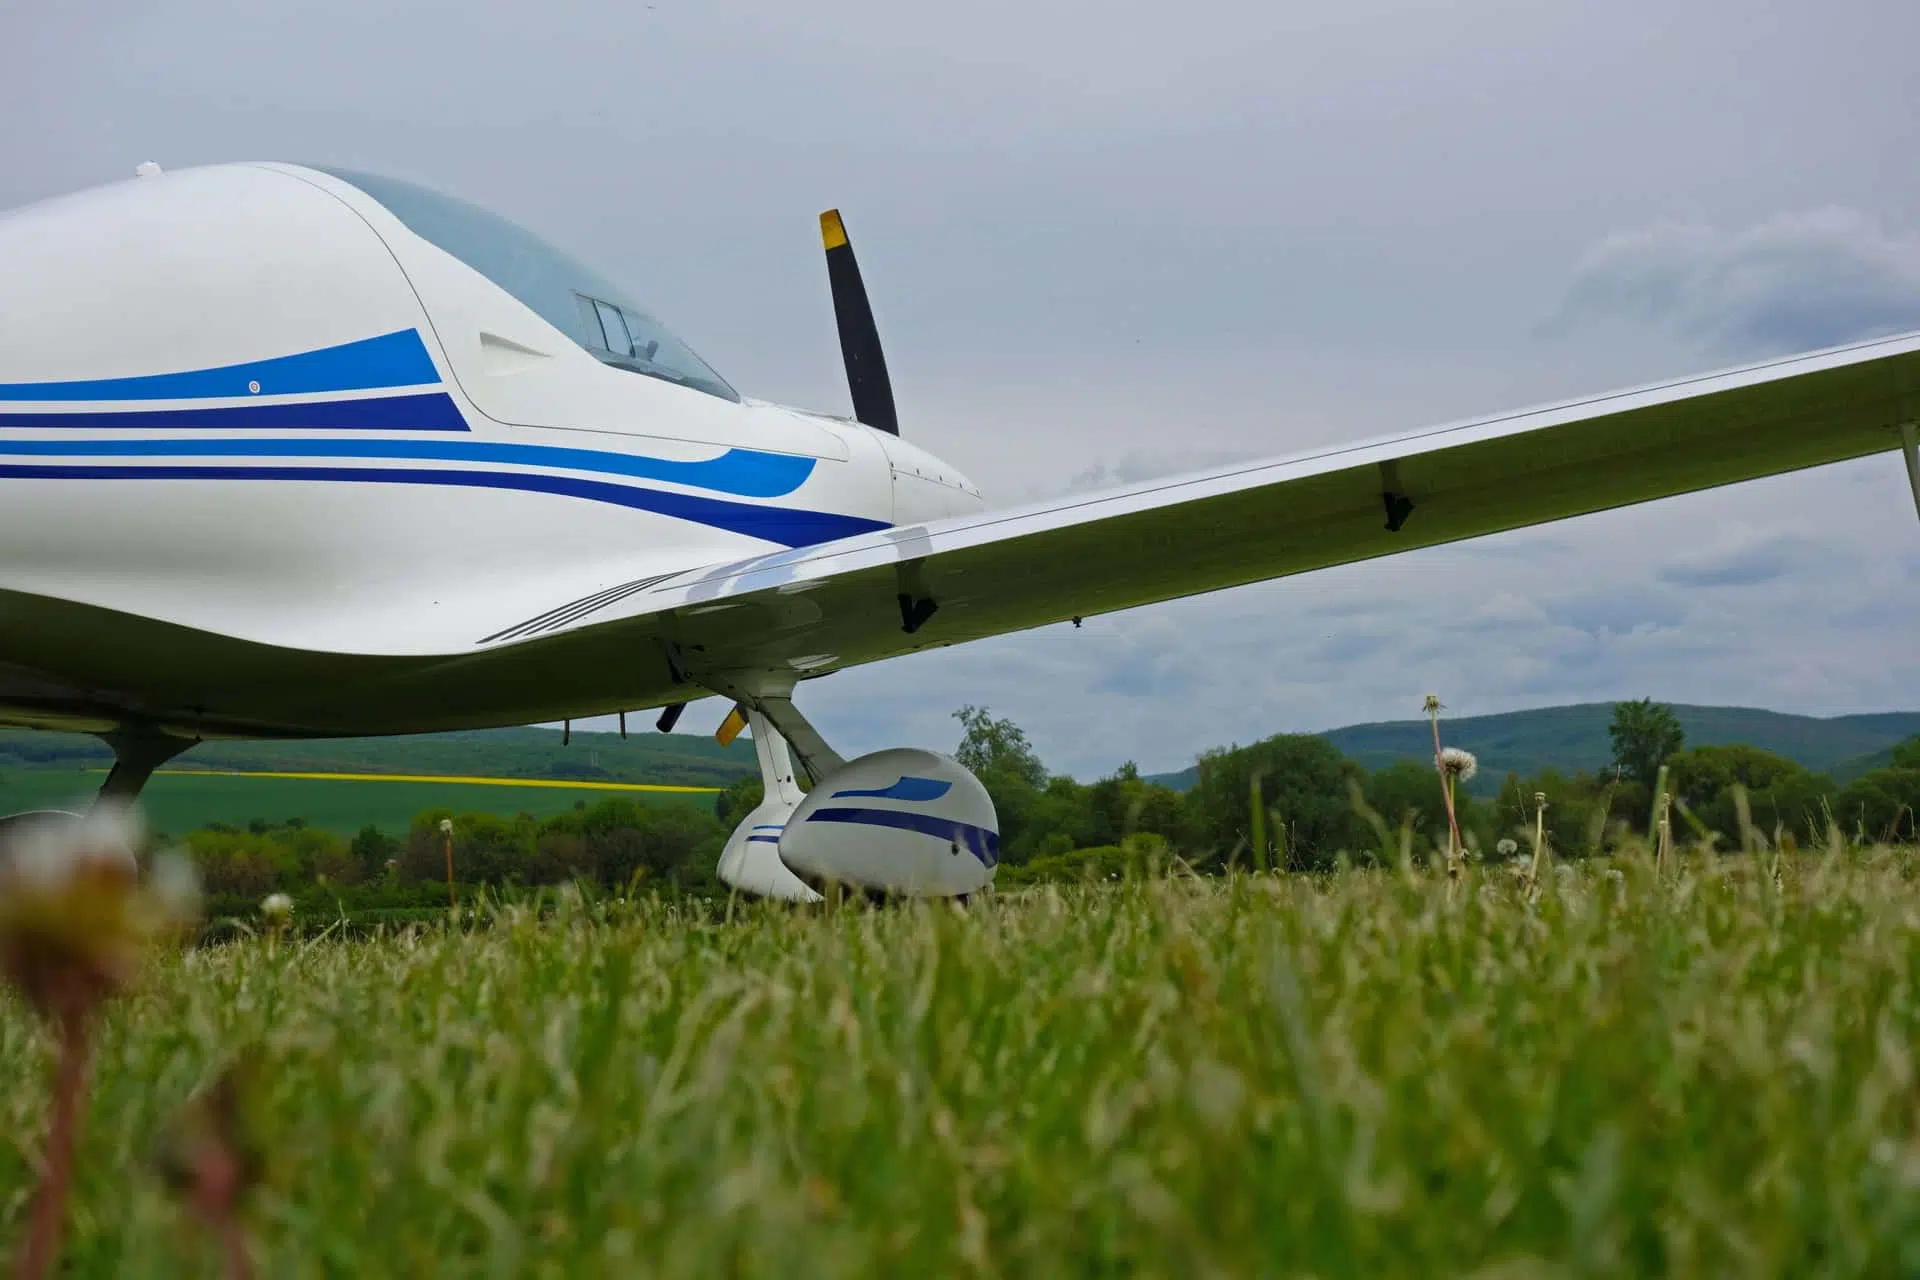 Image of a small aircraft similar to the one a California pilot suspected of flying under the influence used.